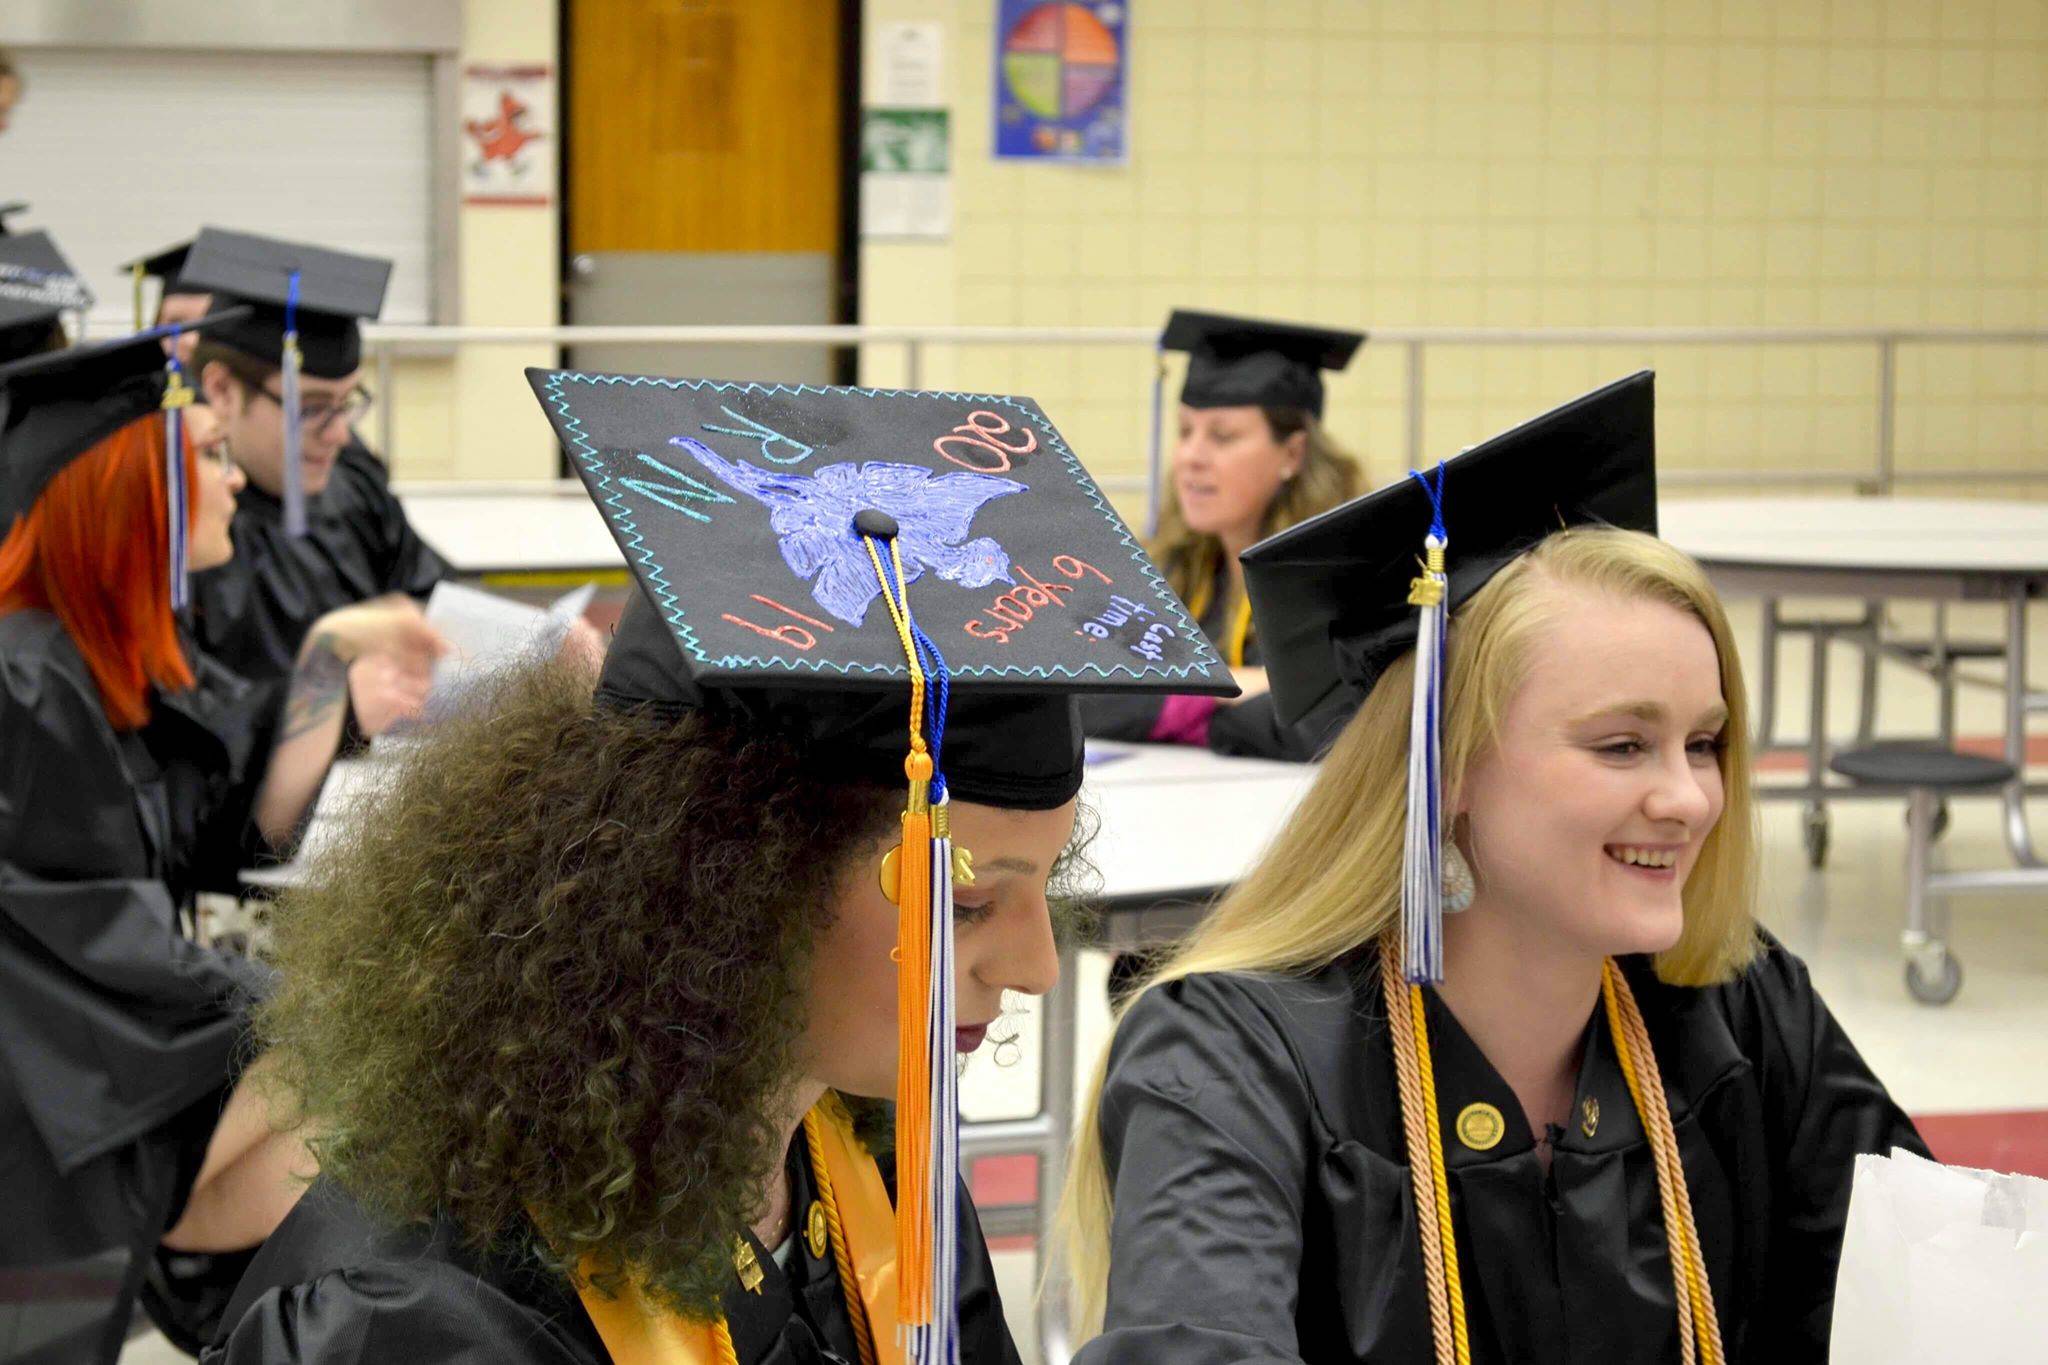 A group of nursing graduates from Kenai Peninsula College’s Kenai River Campus get ready to walk the stage and receive their degrees on Thursday, May 9, 2019, at Kenai Central High School in Kenai, Alaska. (Photo by Victoria Petersen/Peninsula Clarion)